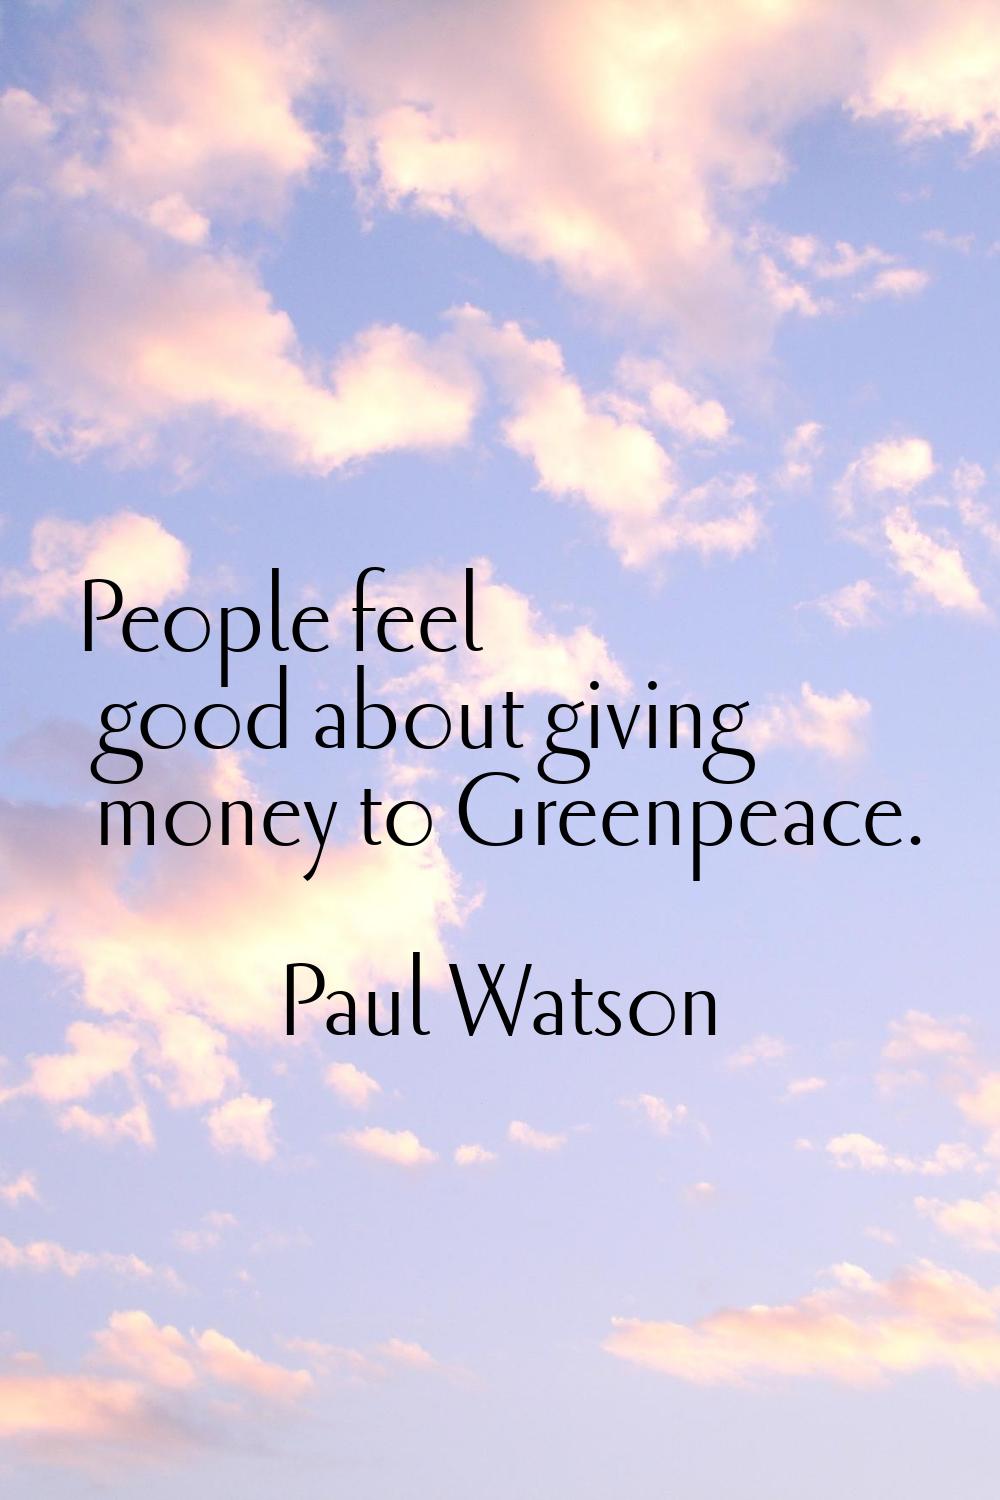 People feel good about giving money to Greenpeace.